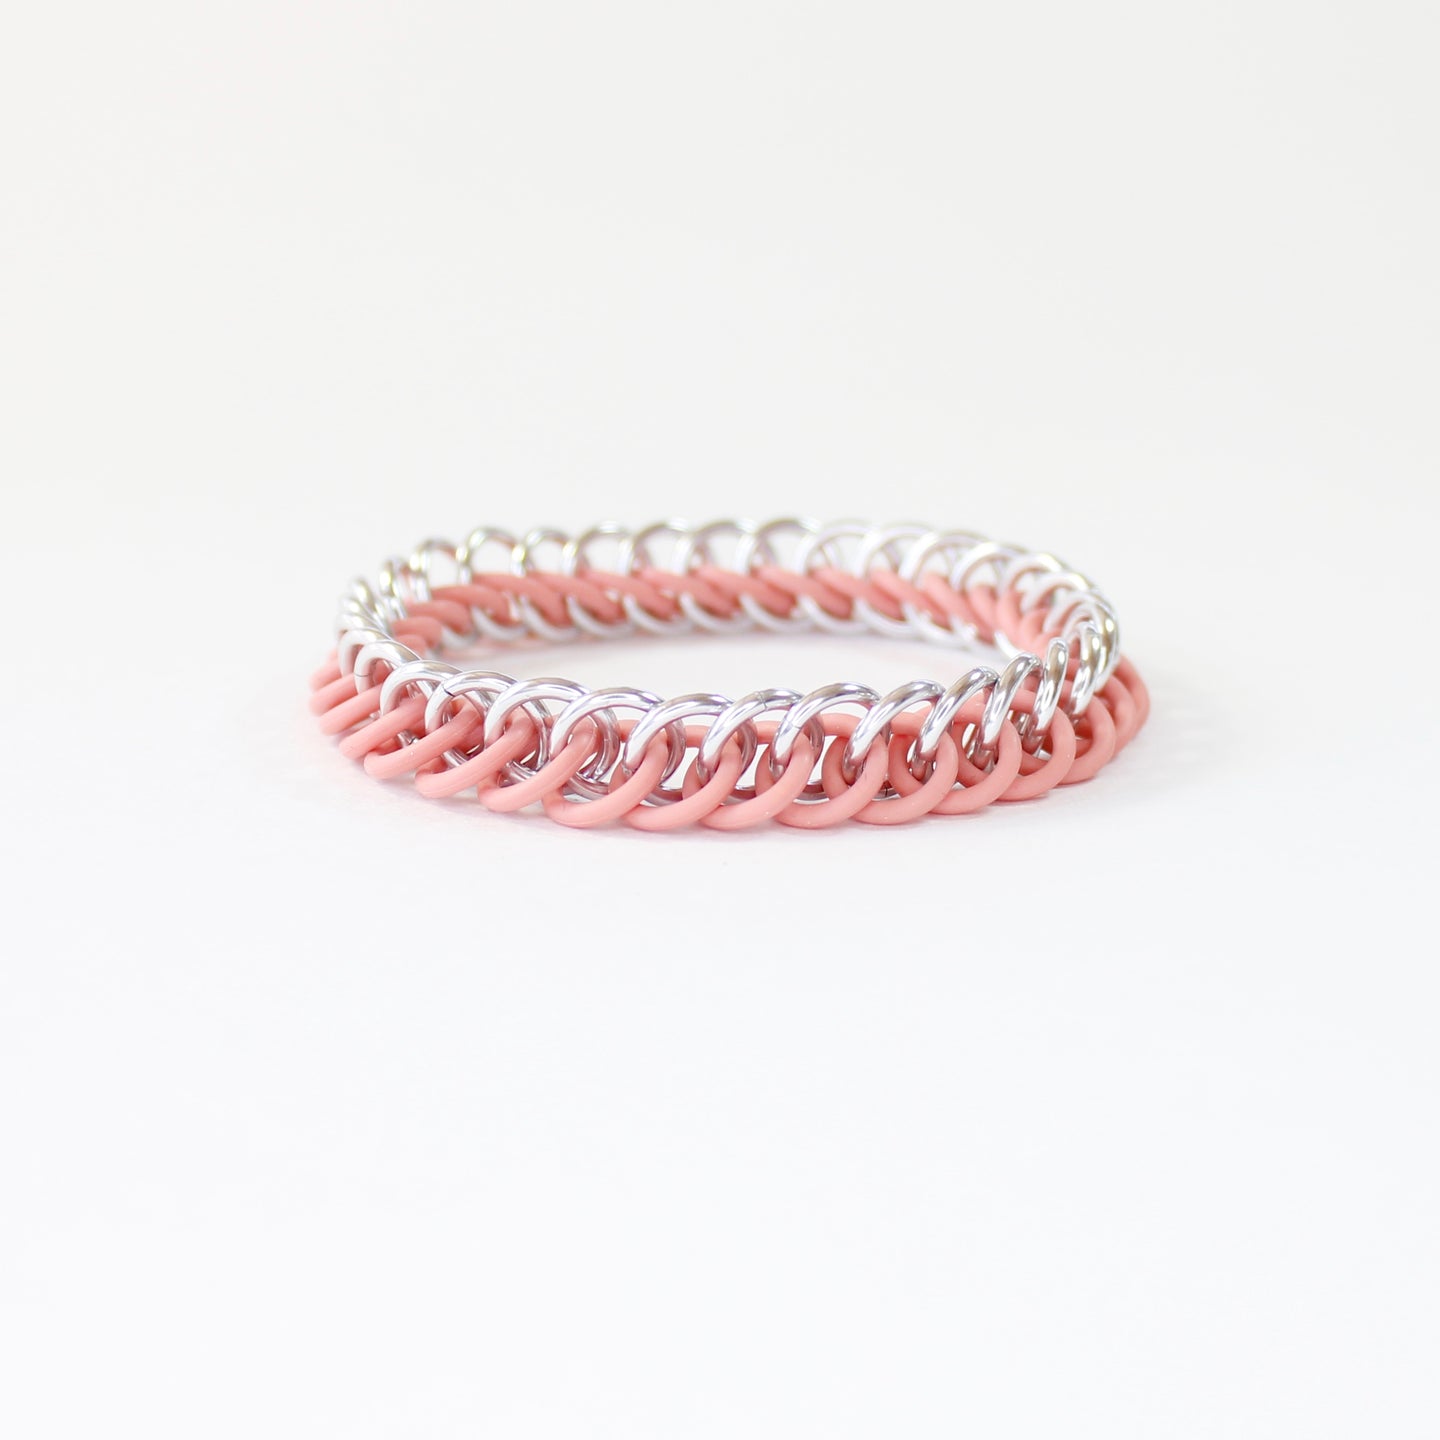 The Persian Stretch Bracelet in Pink + Silver